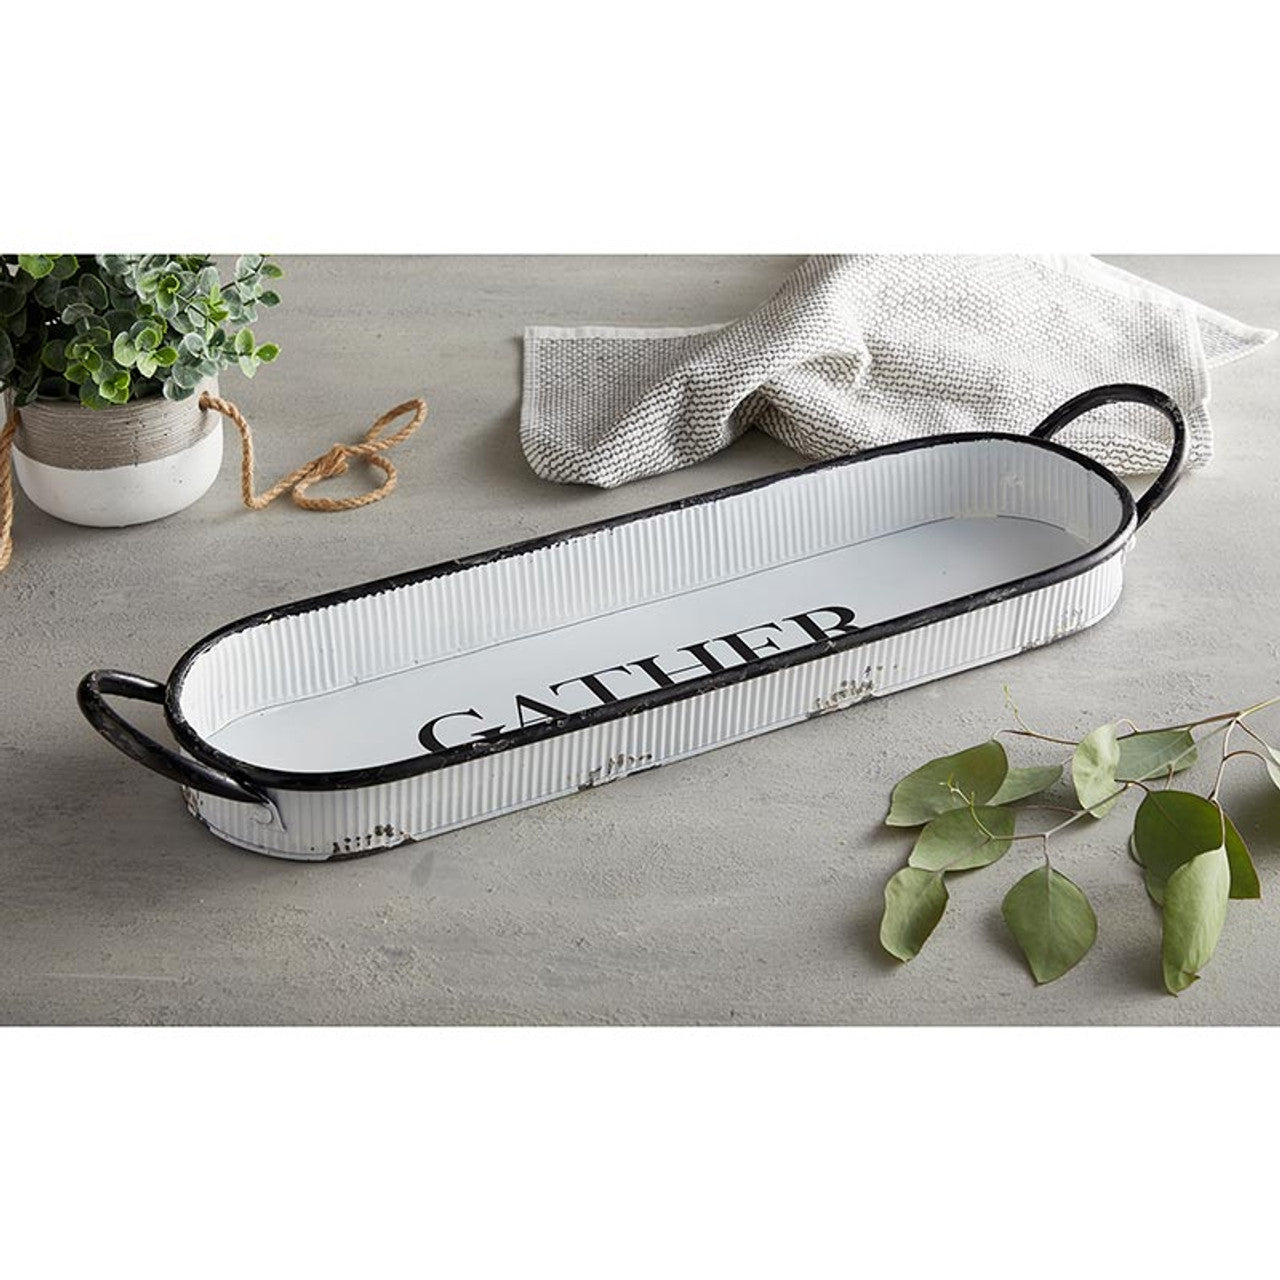 Gather Oval Tray | Decorative Metal Rustic Serving Tray | 20" x 6.5"